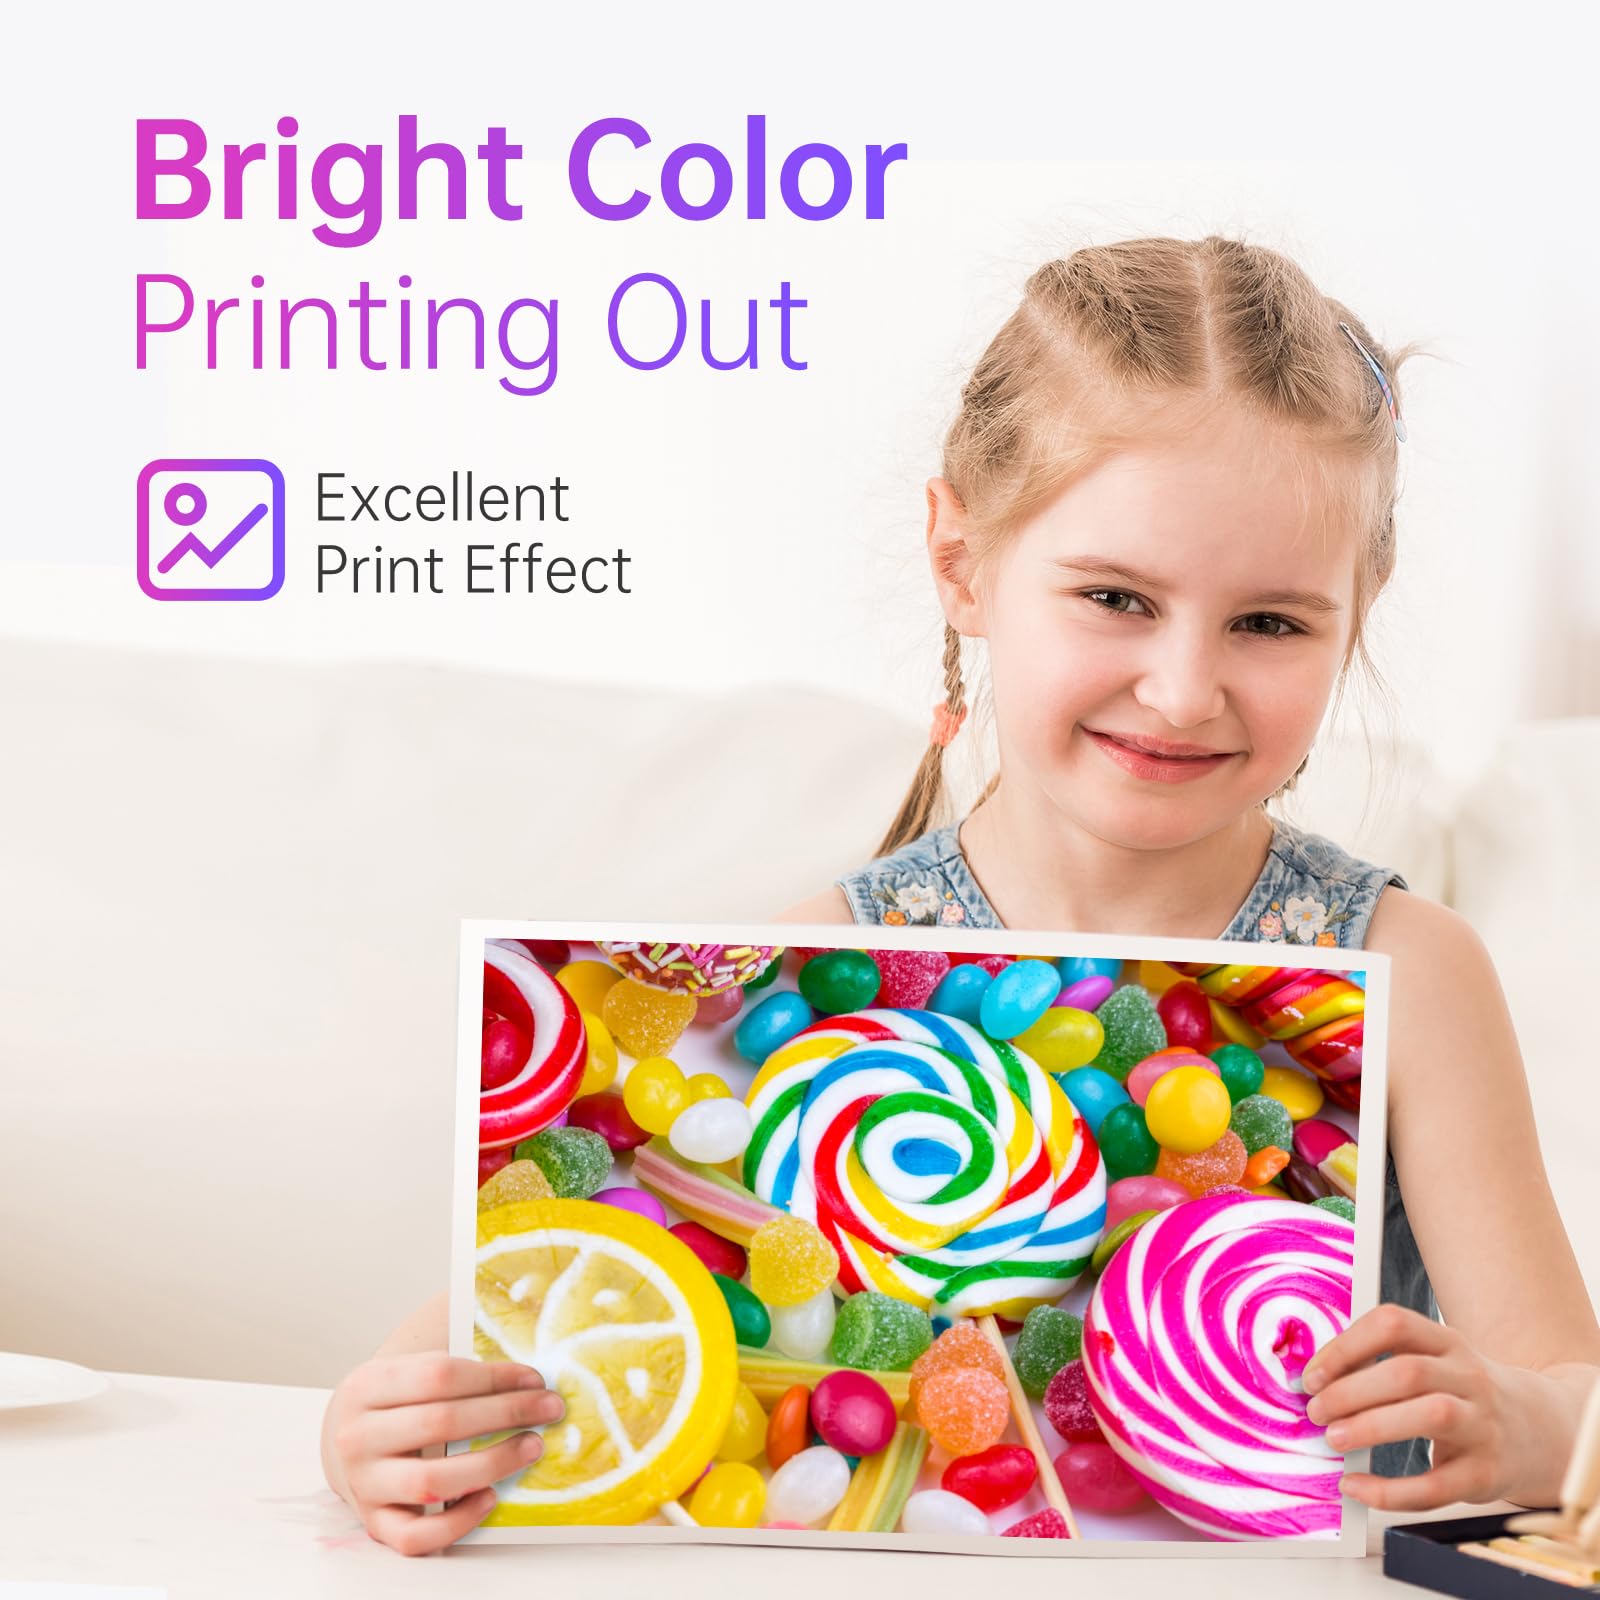 Bright and vibrant color prints from Epson Ink 220XL Cartridges showing excellent print effects on various sweets image.